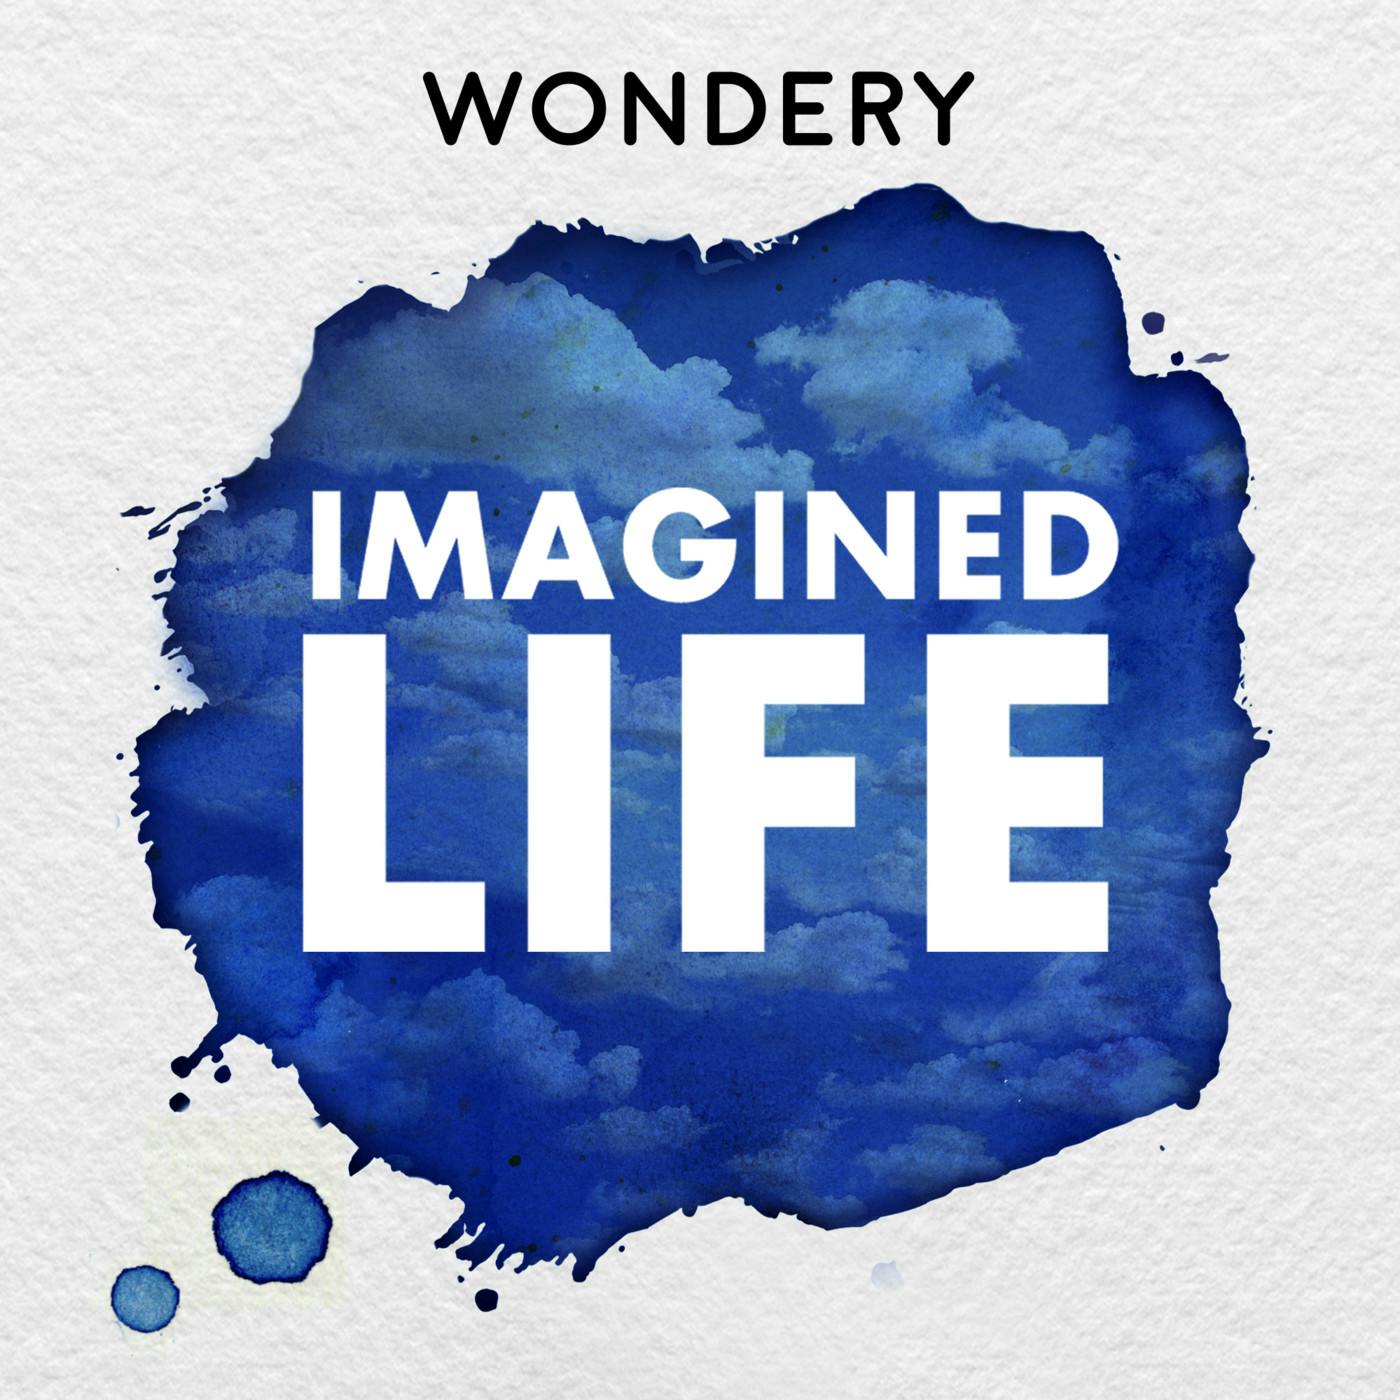 Wondery IMAGINED LIFE FAMILY :  Take a journey and see the world through someone else’s eyes.